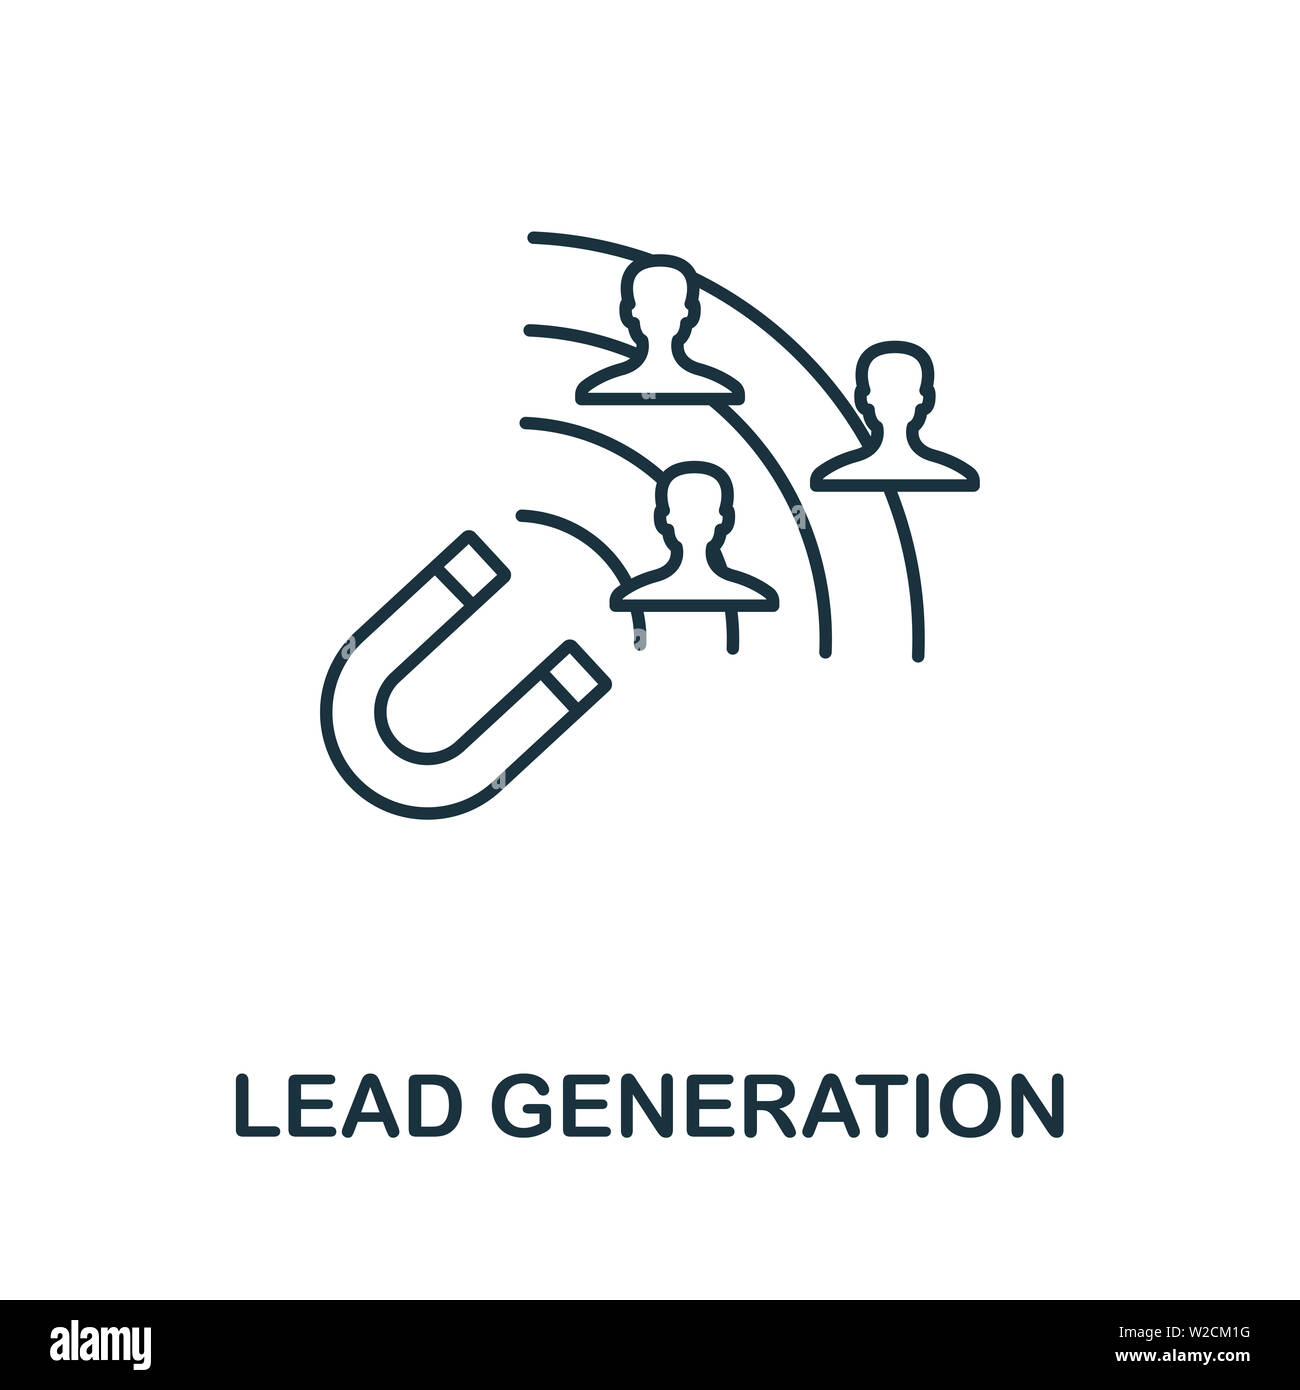 Lead Generation outline icon. Thin line concept element from content icons collection. Creative Lead Generation icon for mobile apps and web usage Stock Photo